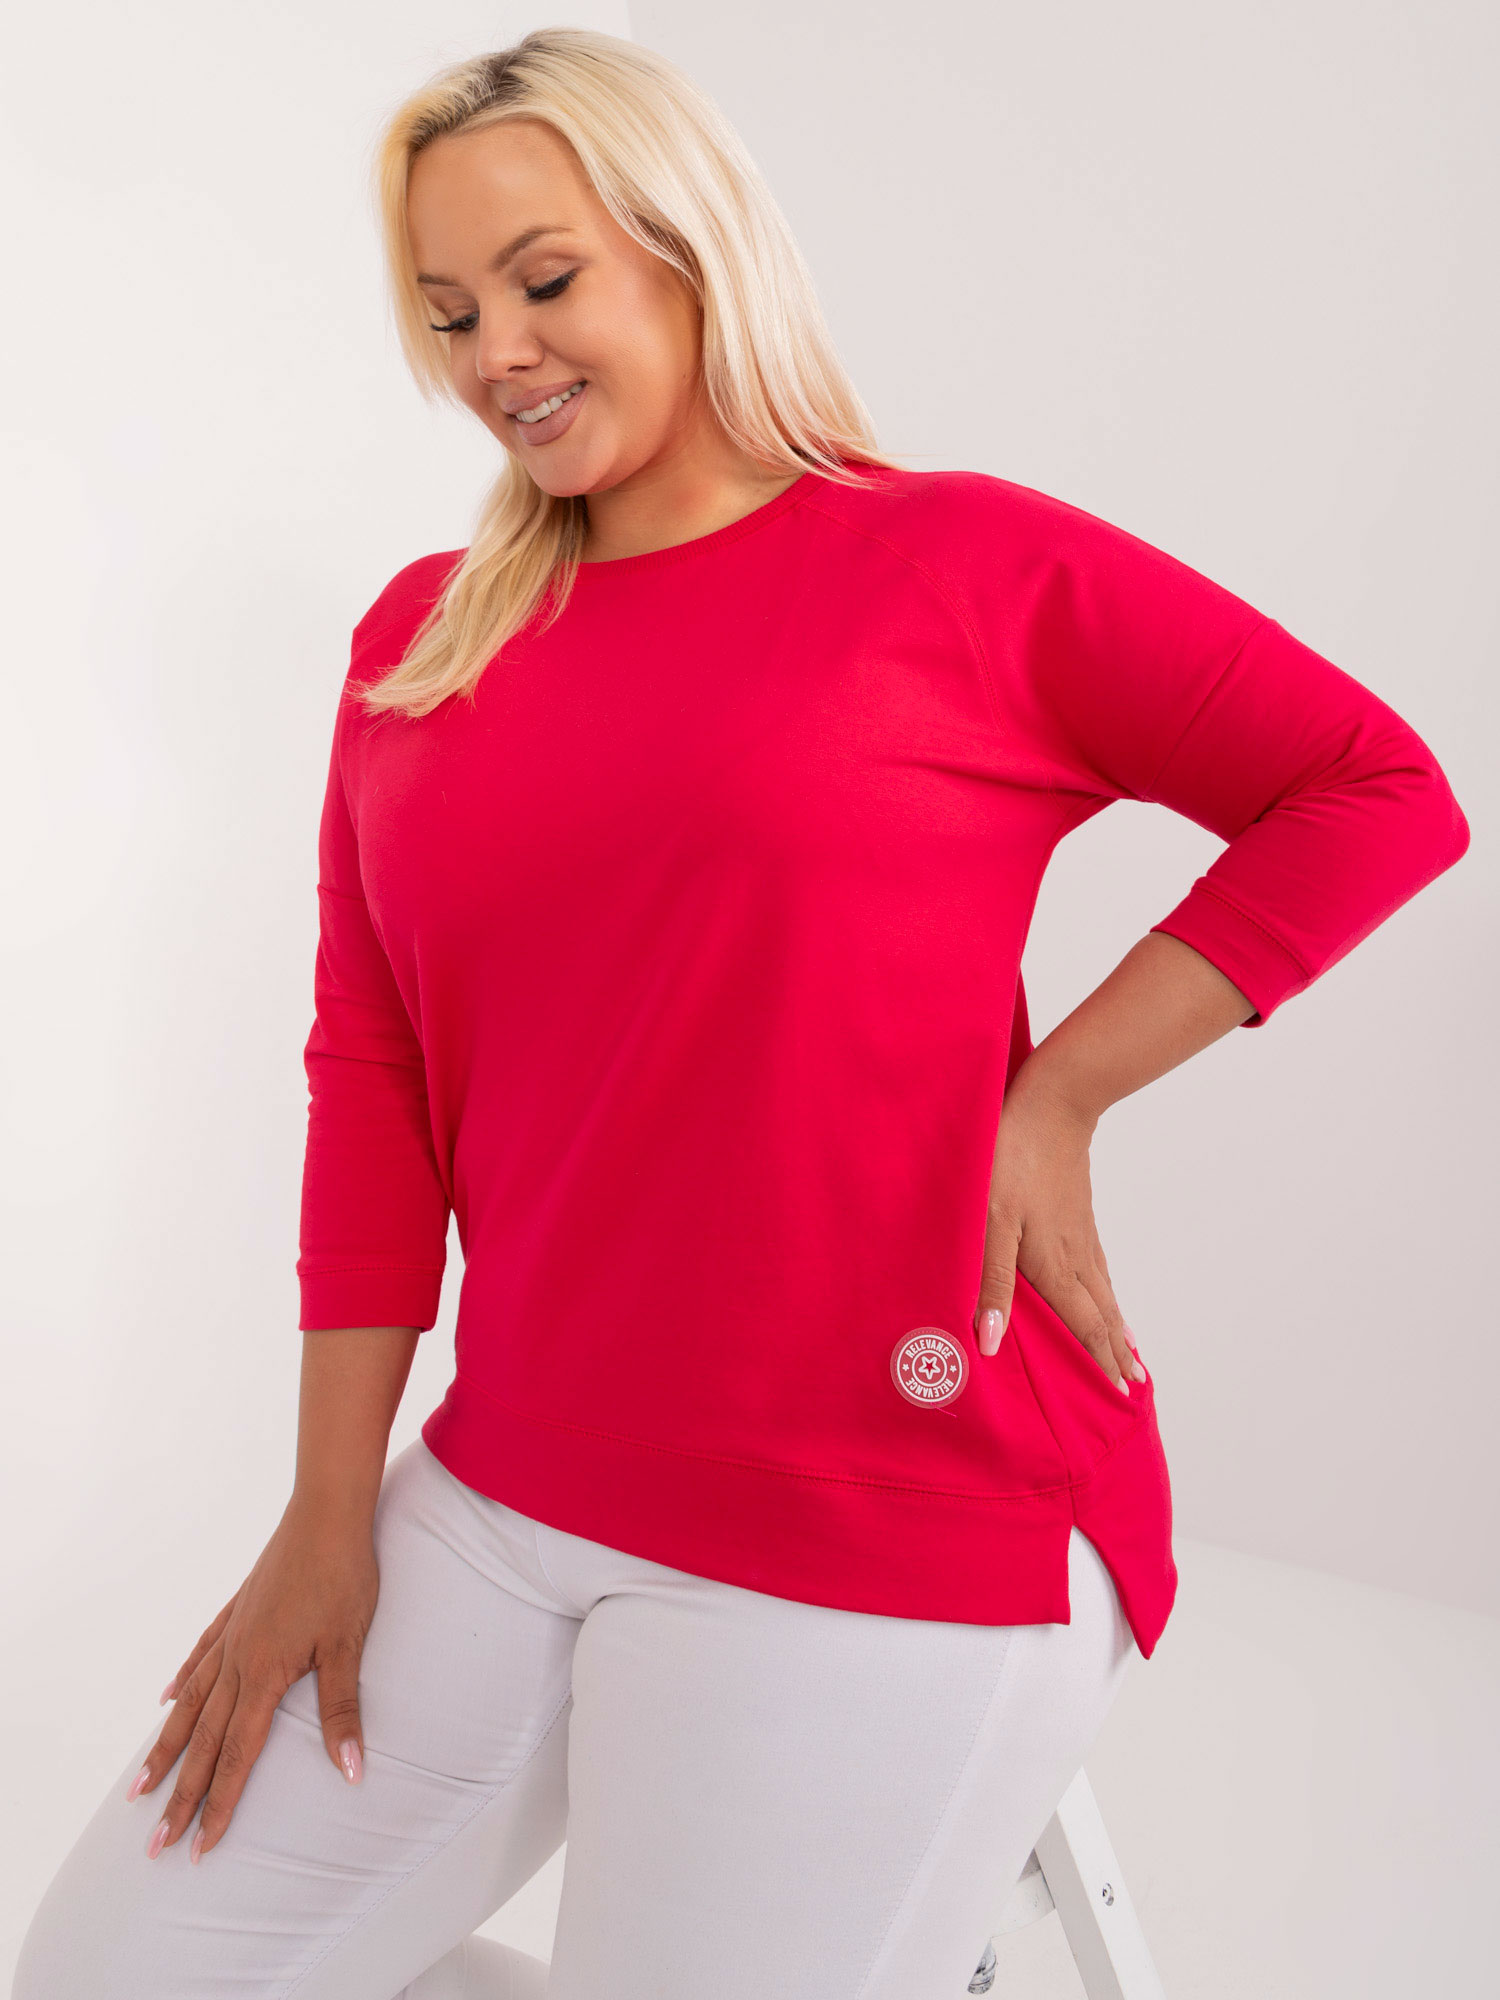 Red smooth blouse plus size asymmetrical cut